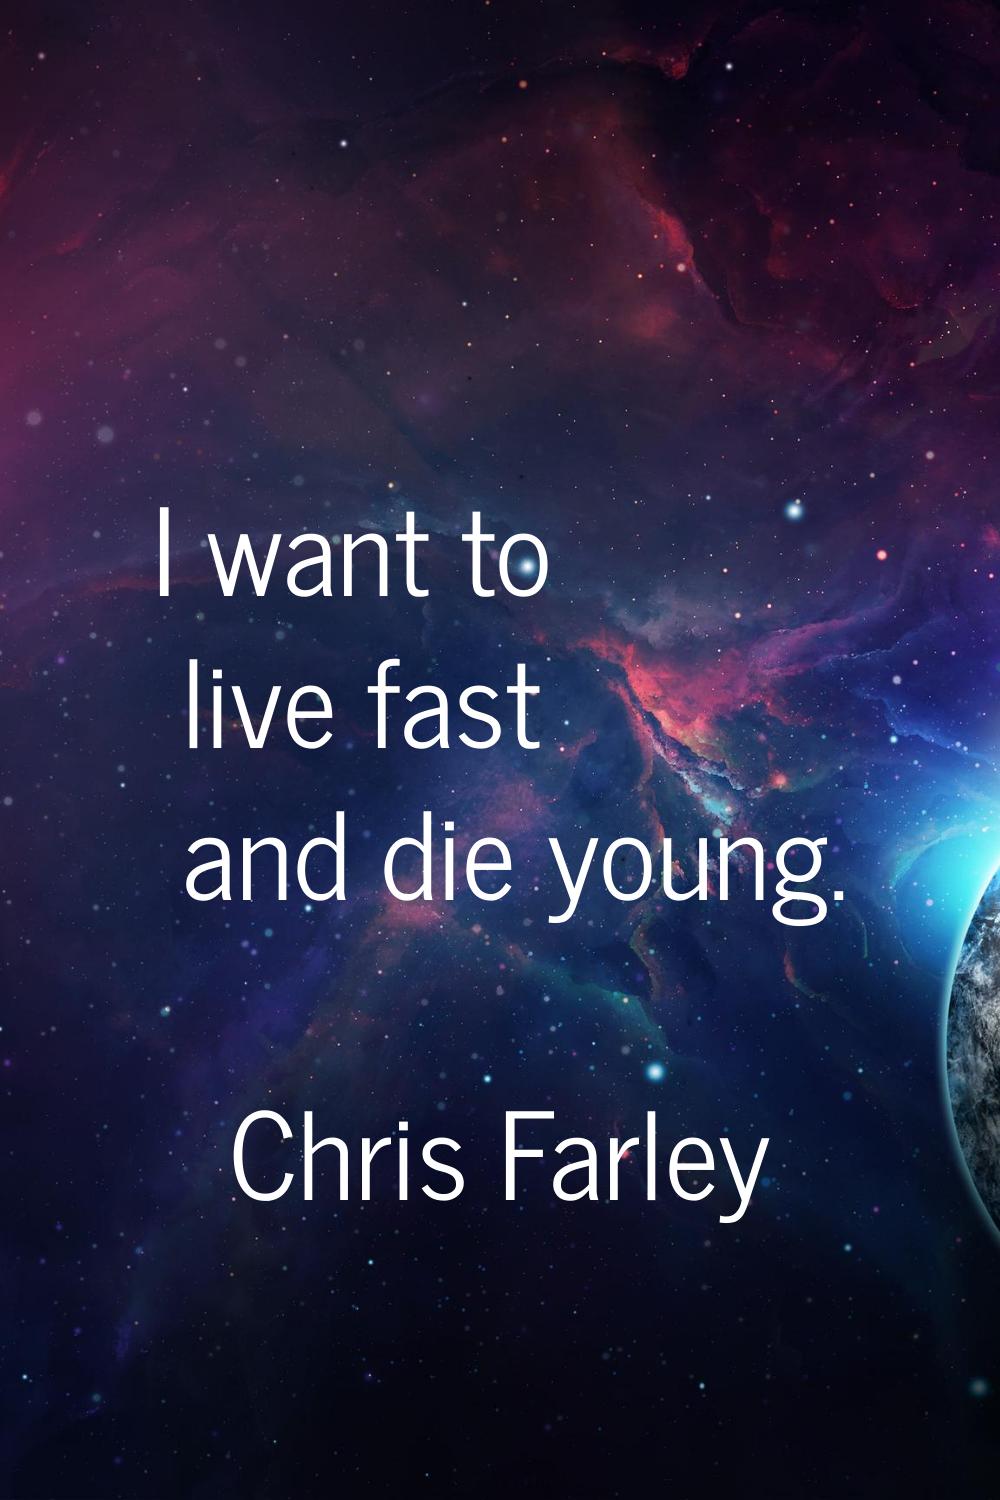 I want to live fast and die young.